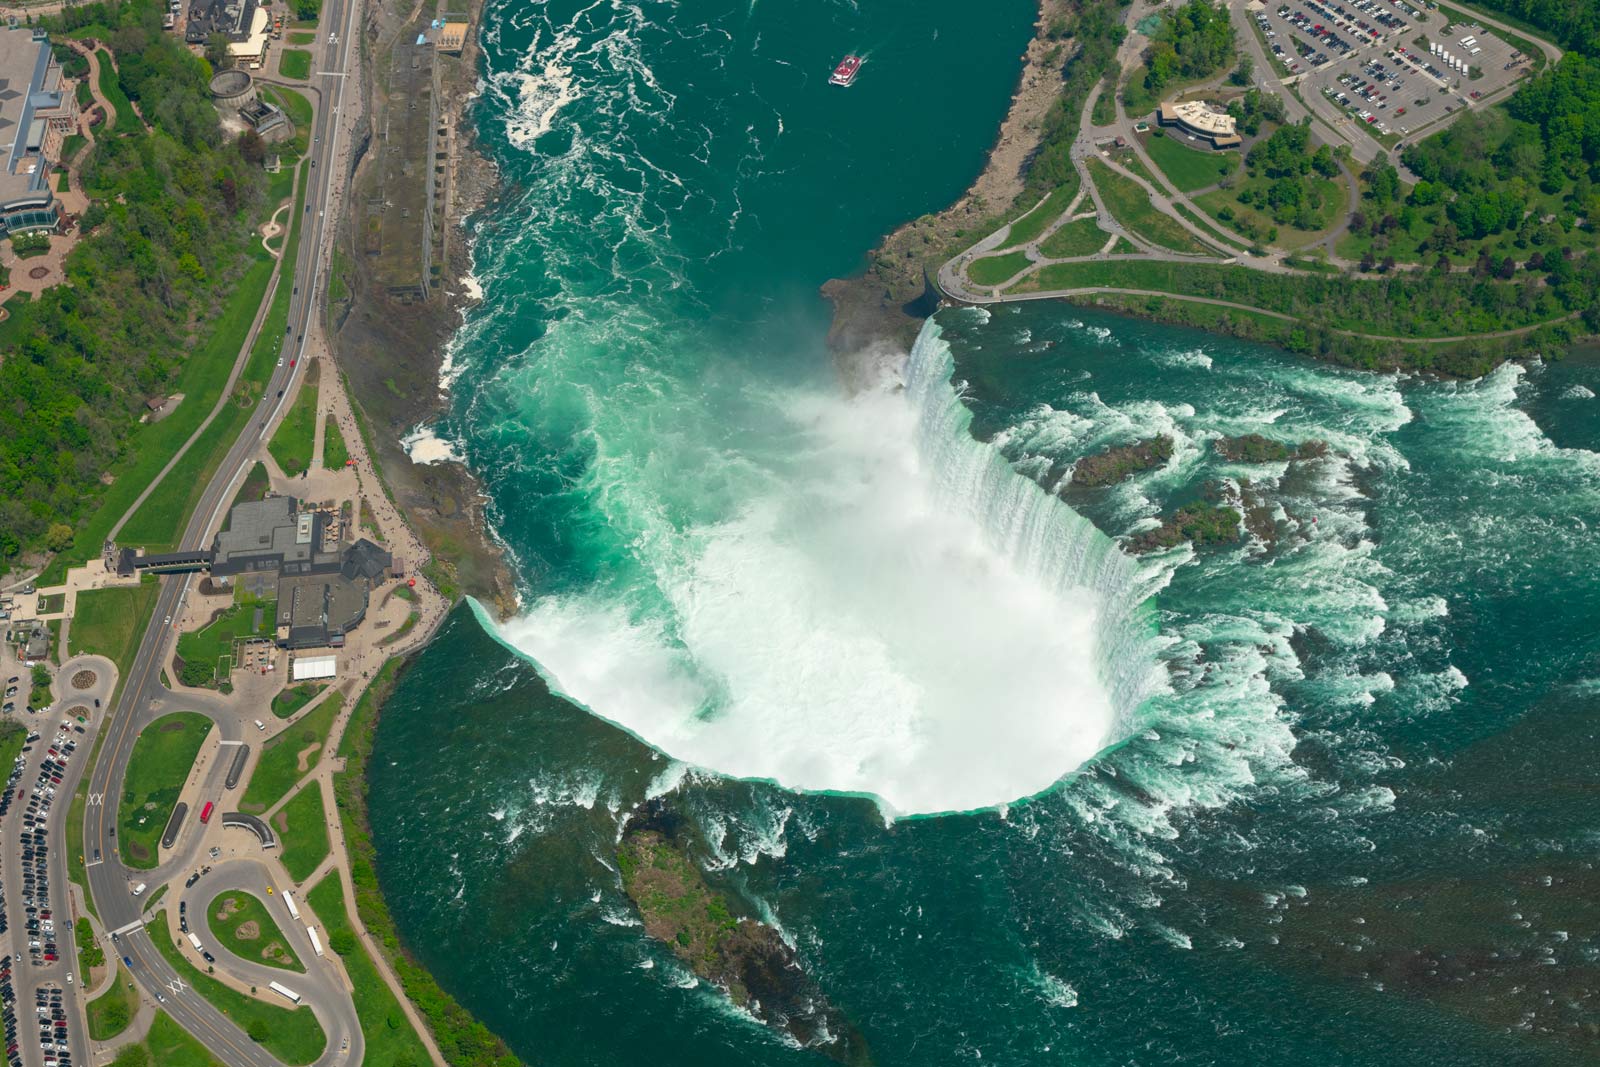 Best Views of Niagara Falls Helicopter Tour